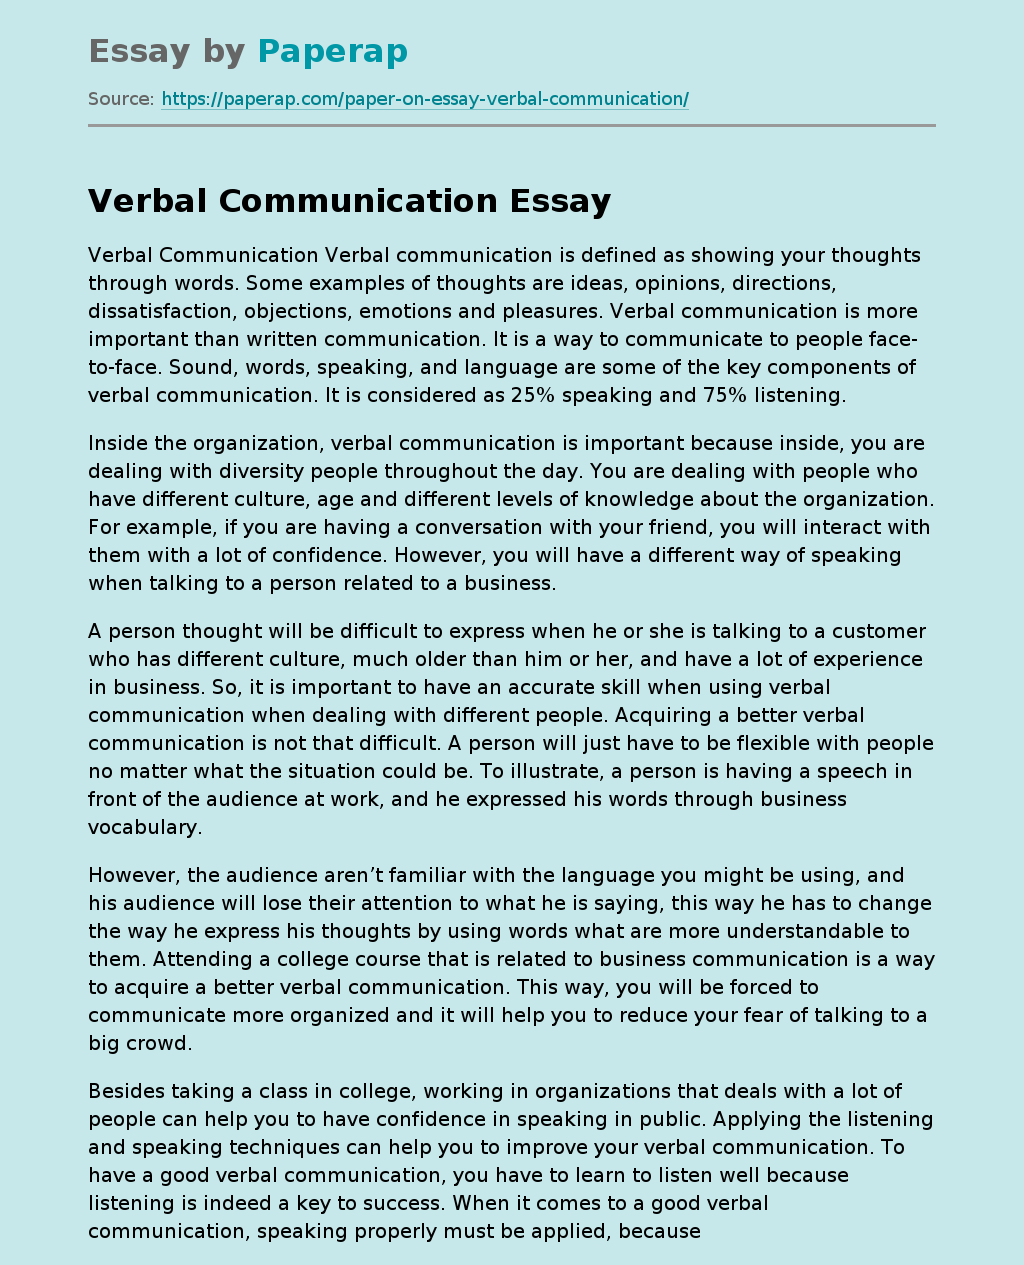 the importance of verbal communication essay